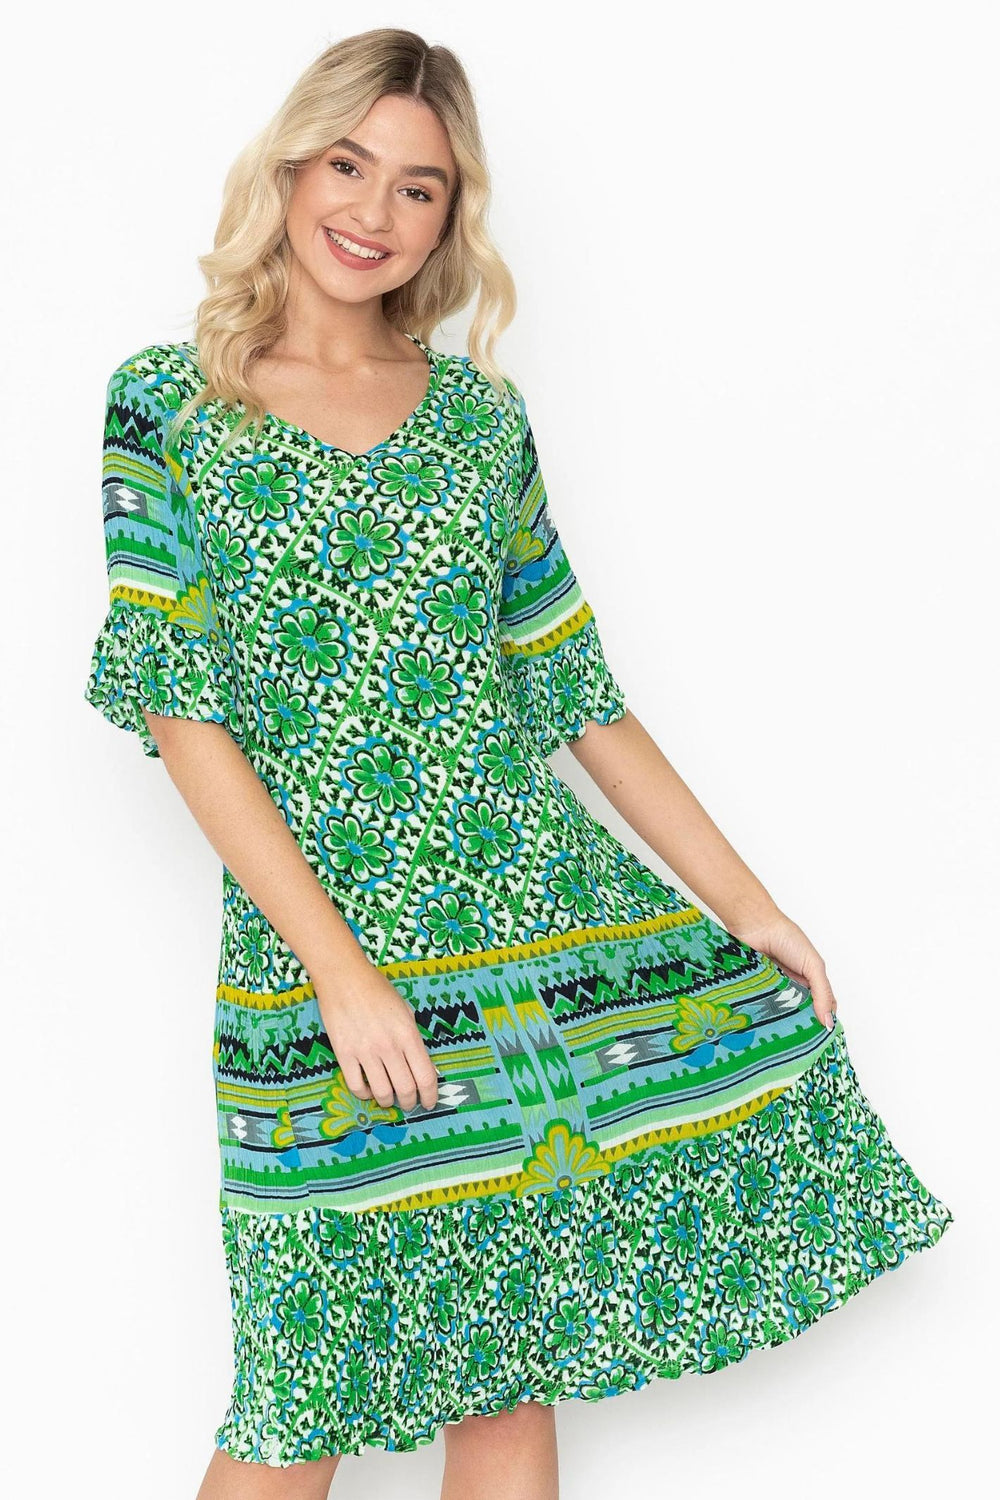 One Summer DW2E Green Mosaic Print Jessica Dress - Experience Boutique